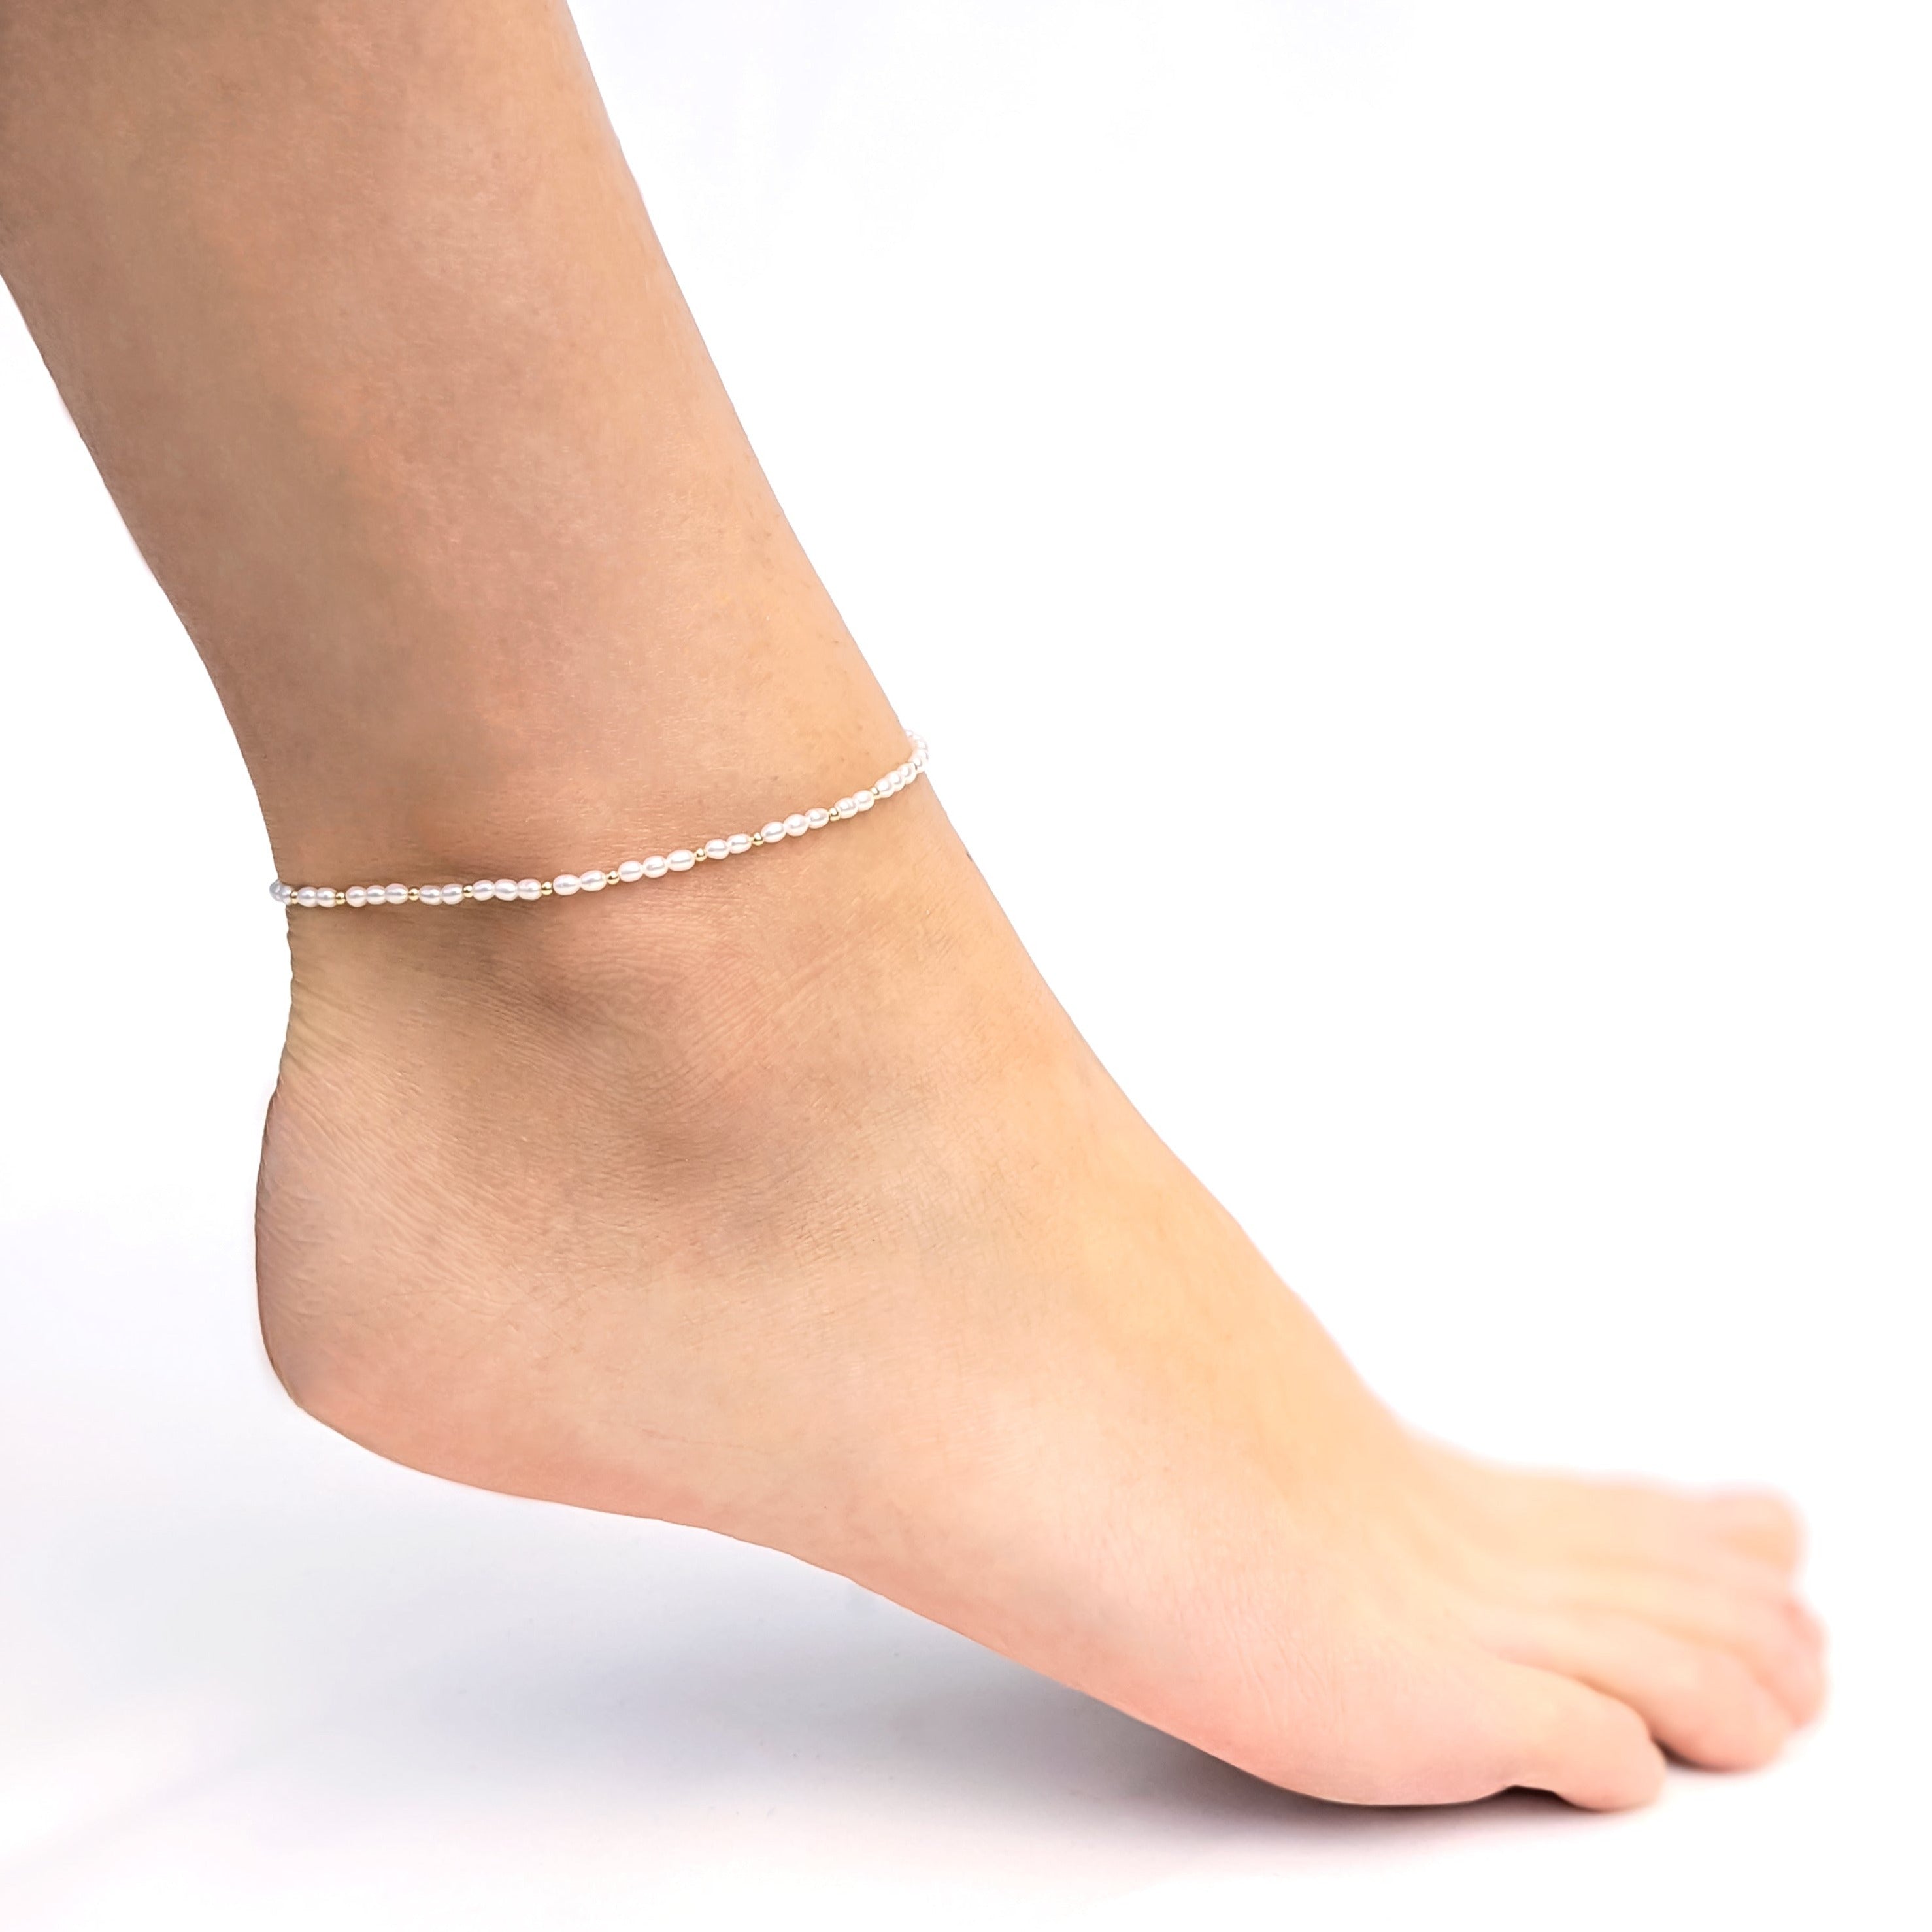 Beaded seed pearl anklet with tiny gold beads